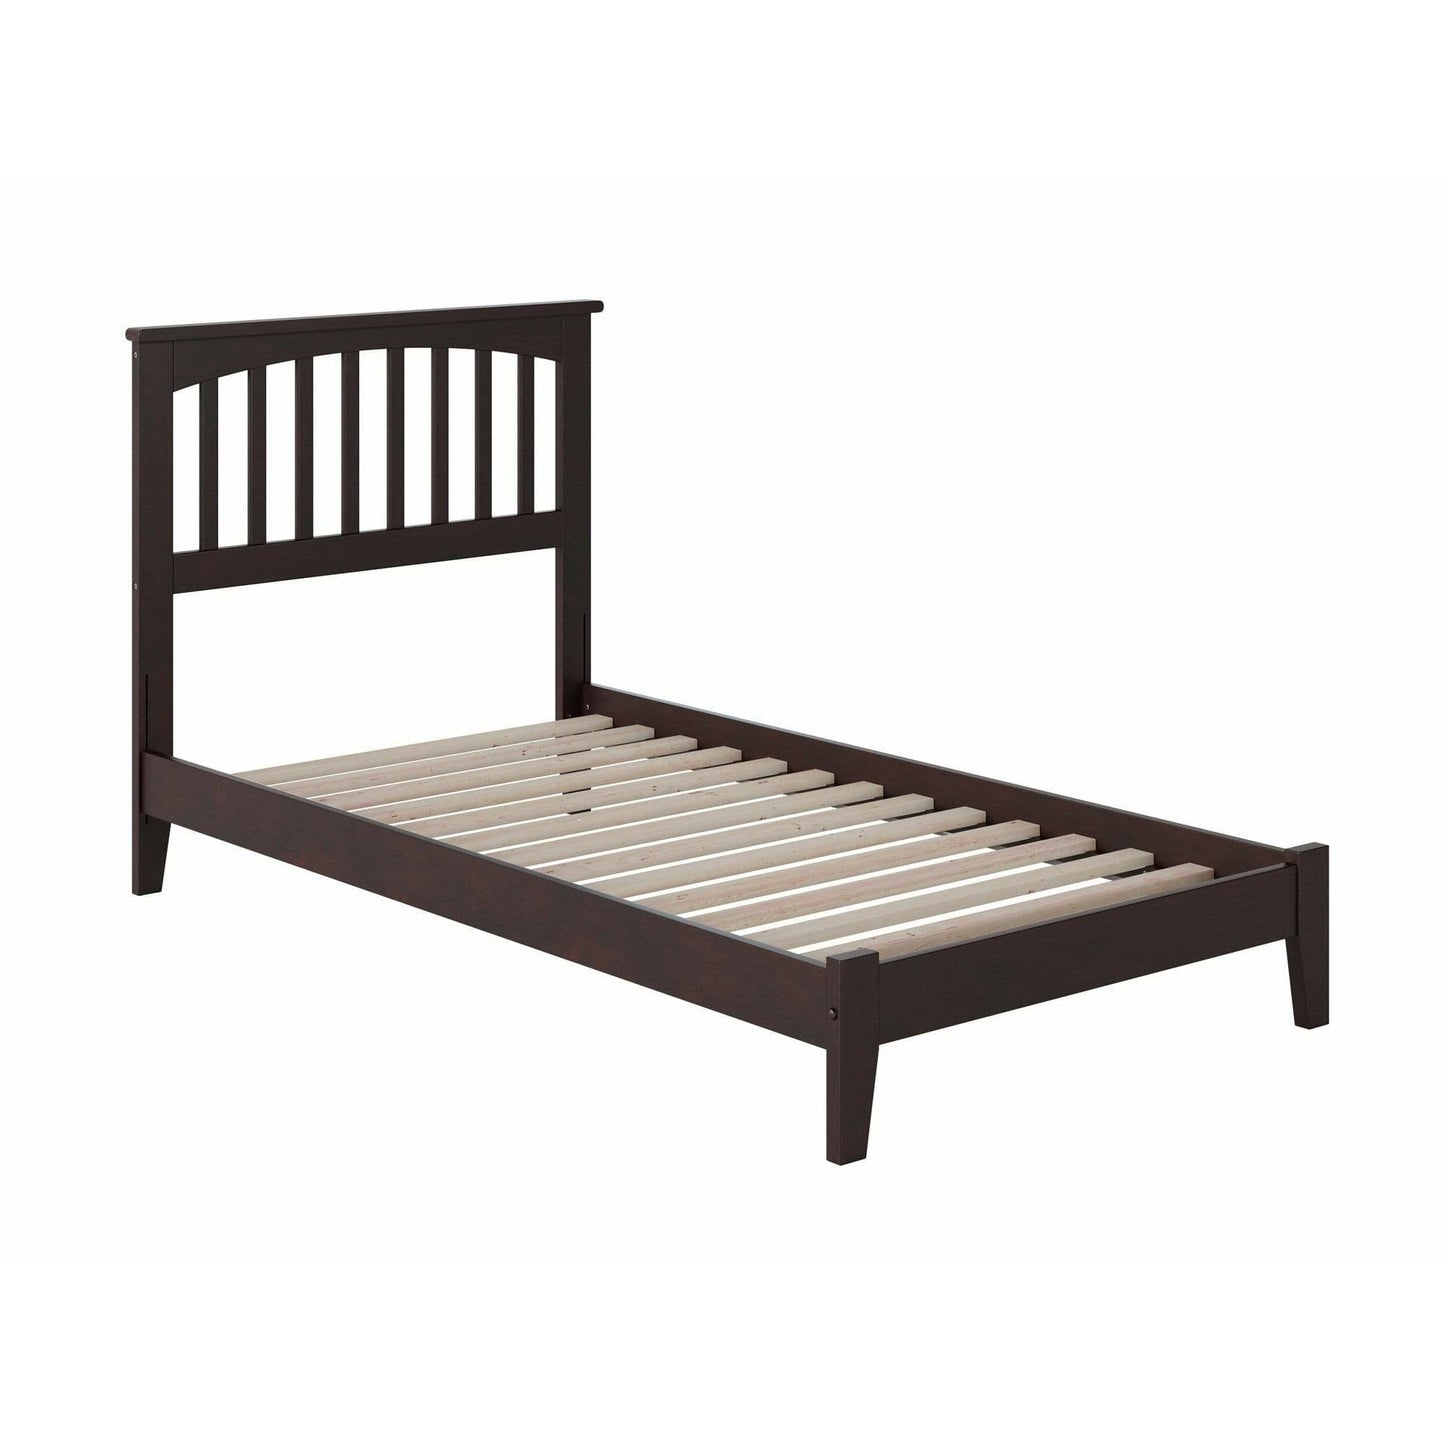 Atlantic Furniture Bed Mission Twin Platform Bed with Open Foot Board in Espresso